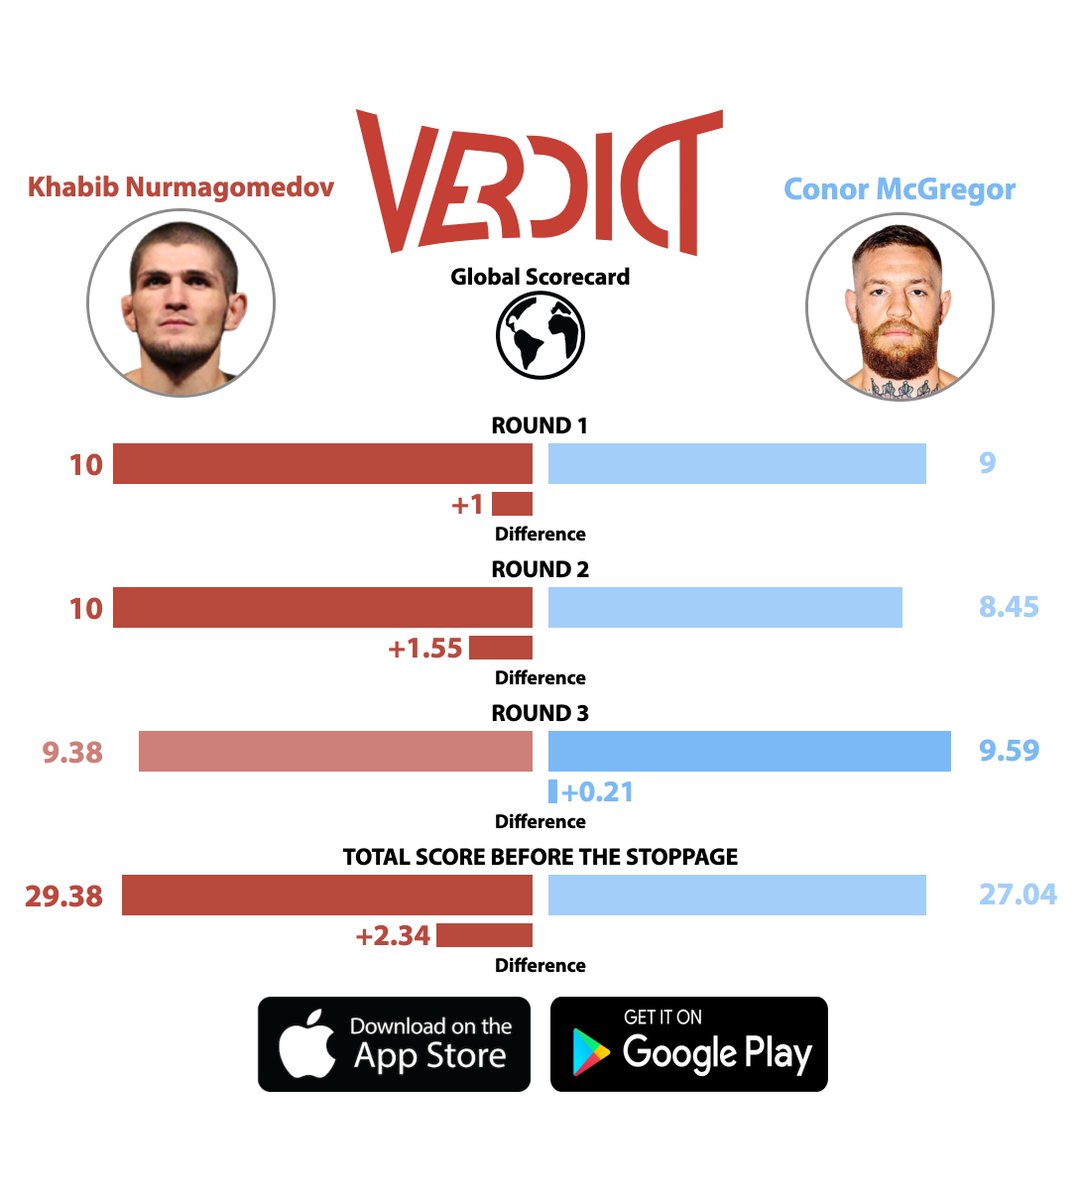 Khabib then went onto defeat Conor McGregor in the biggest fight in UFC history.After a definitive first 2 rounds, Khabib lost a close 3rd round to McGregor before finishing the fight in the 4th.